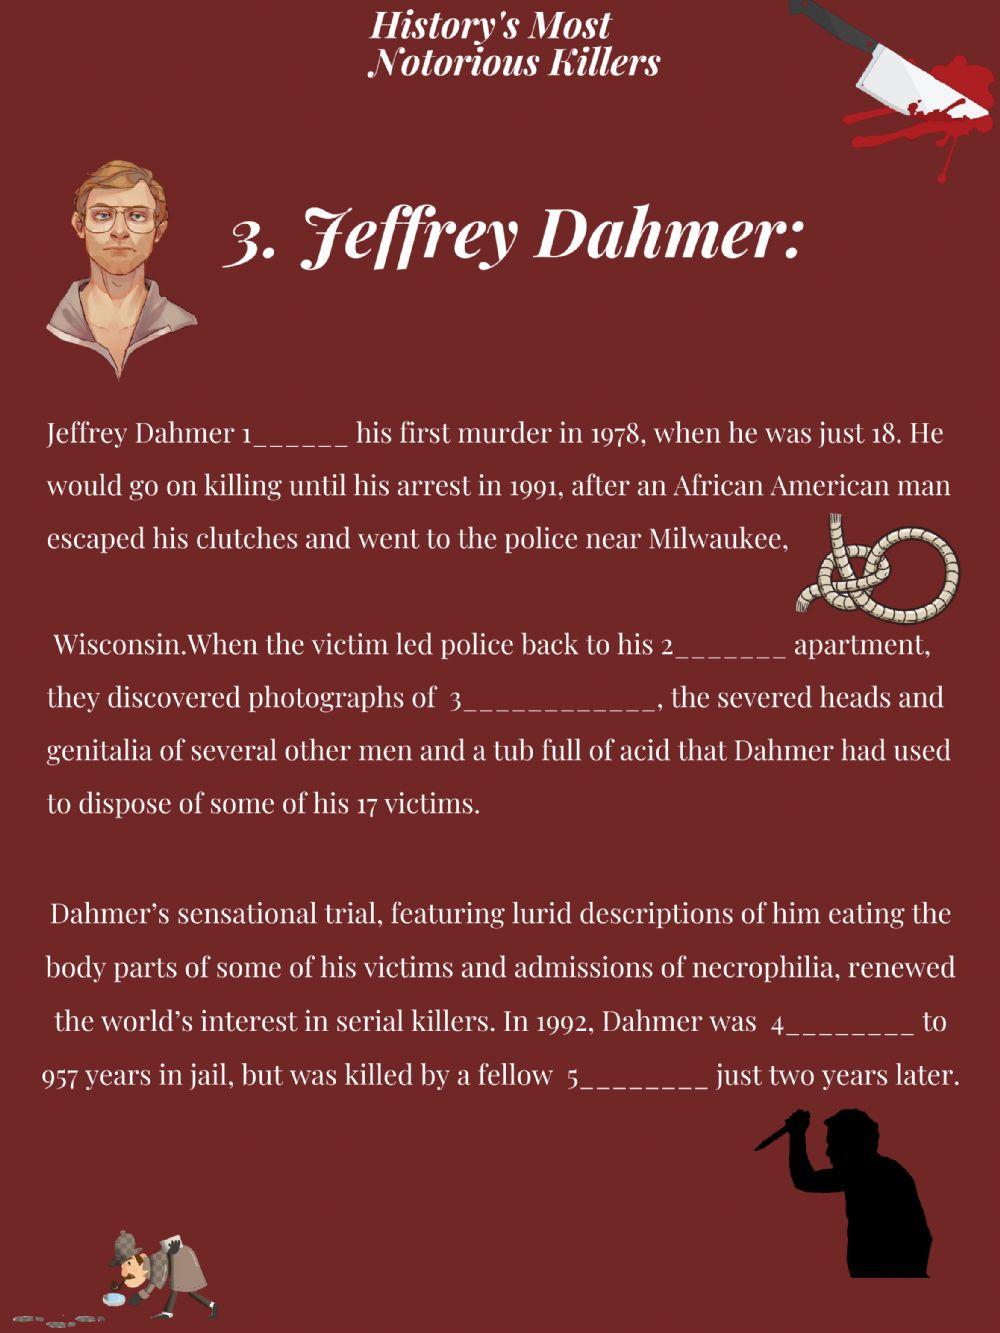 History’s Most Notorious Serial Killers